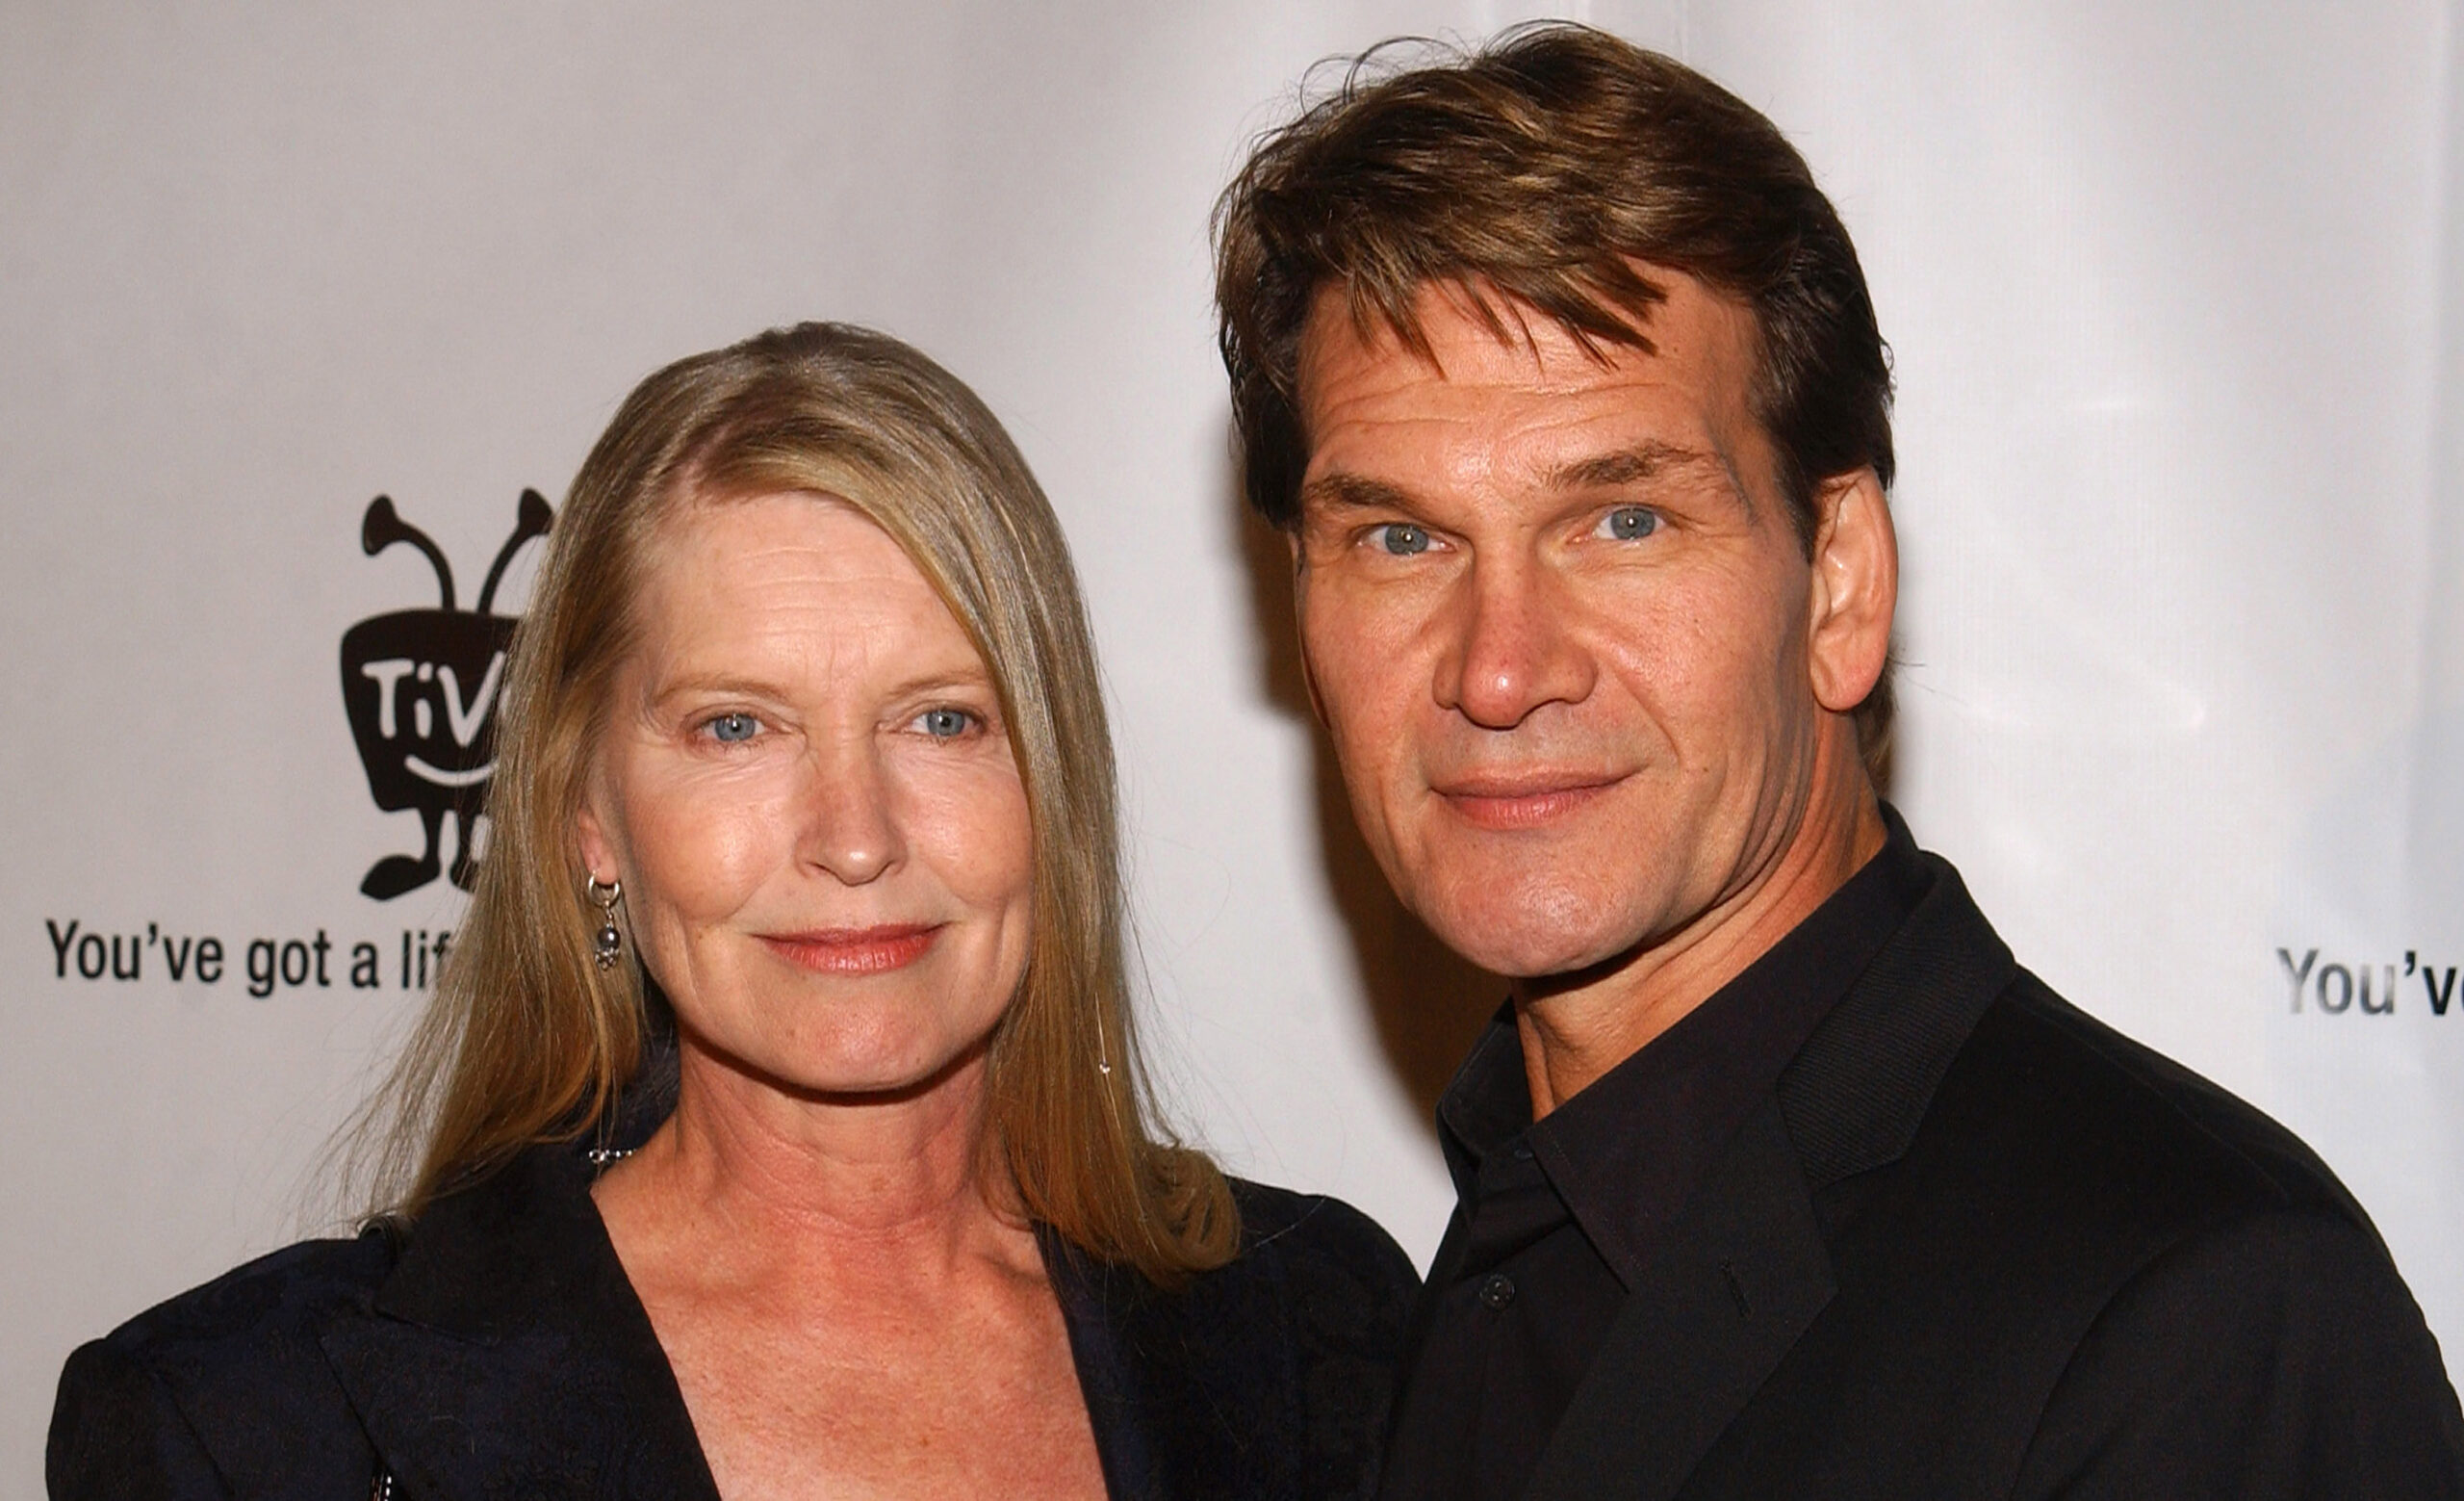 Patrick Swayze’s widow faces criticism from passionate fans for remarrying post his passing